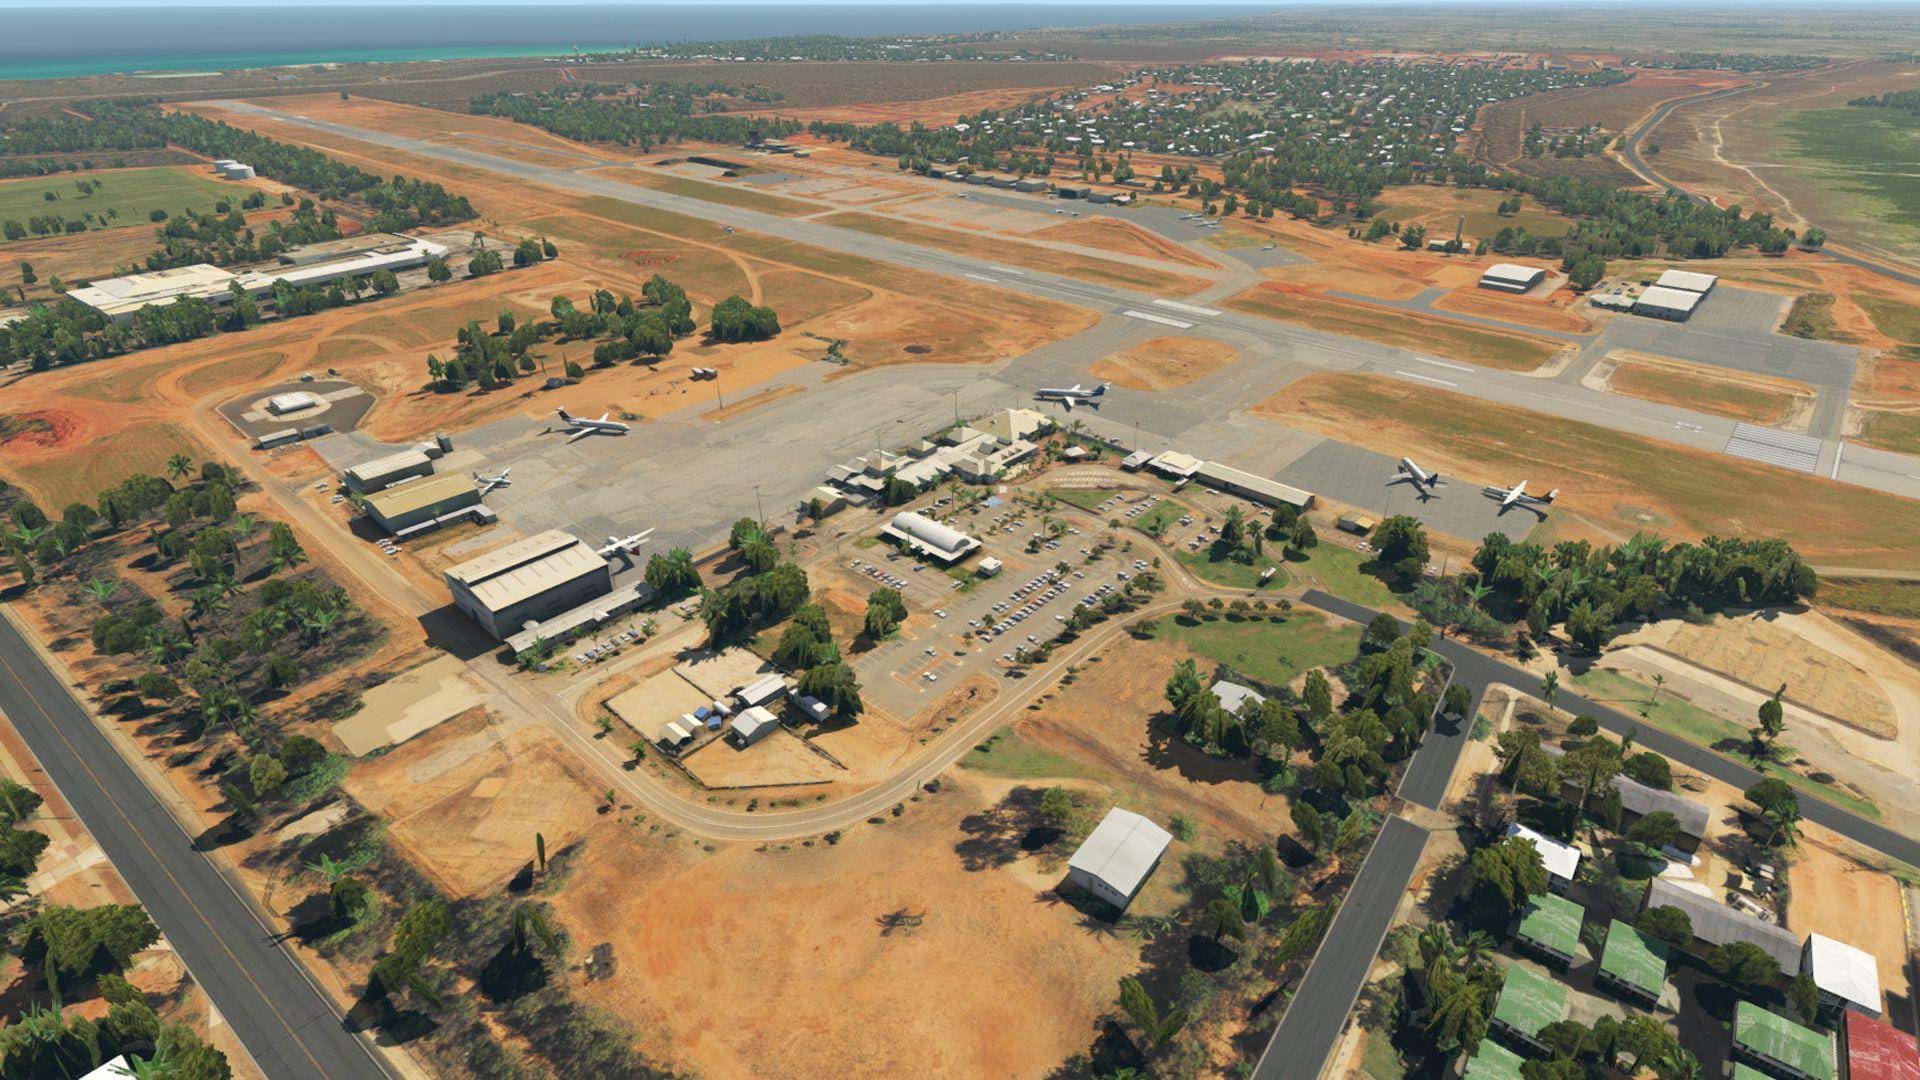 ORBX Broome Intl for X-Plane